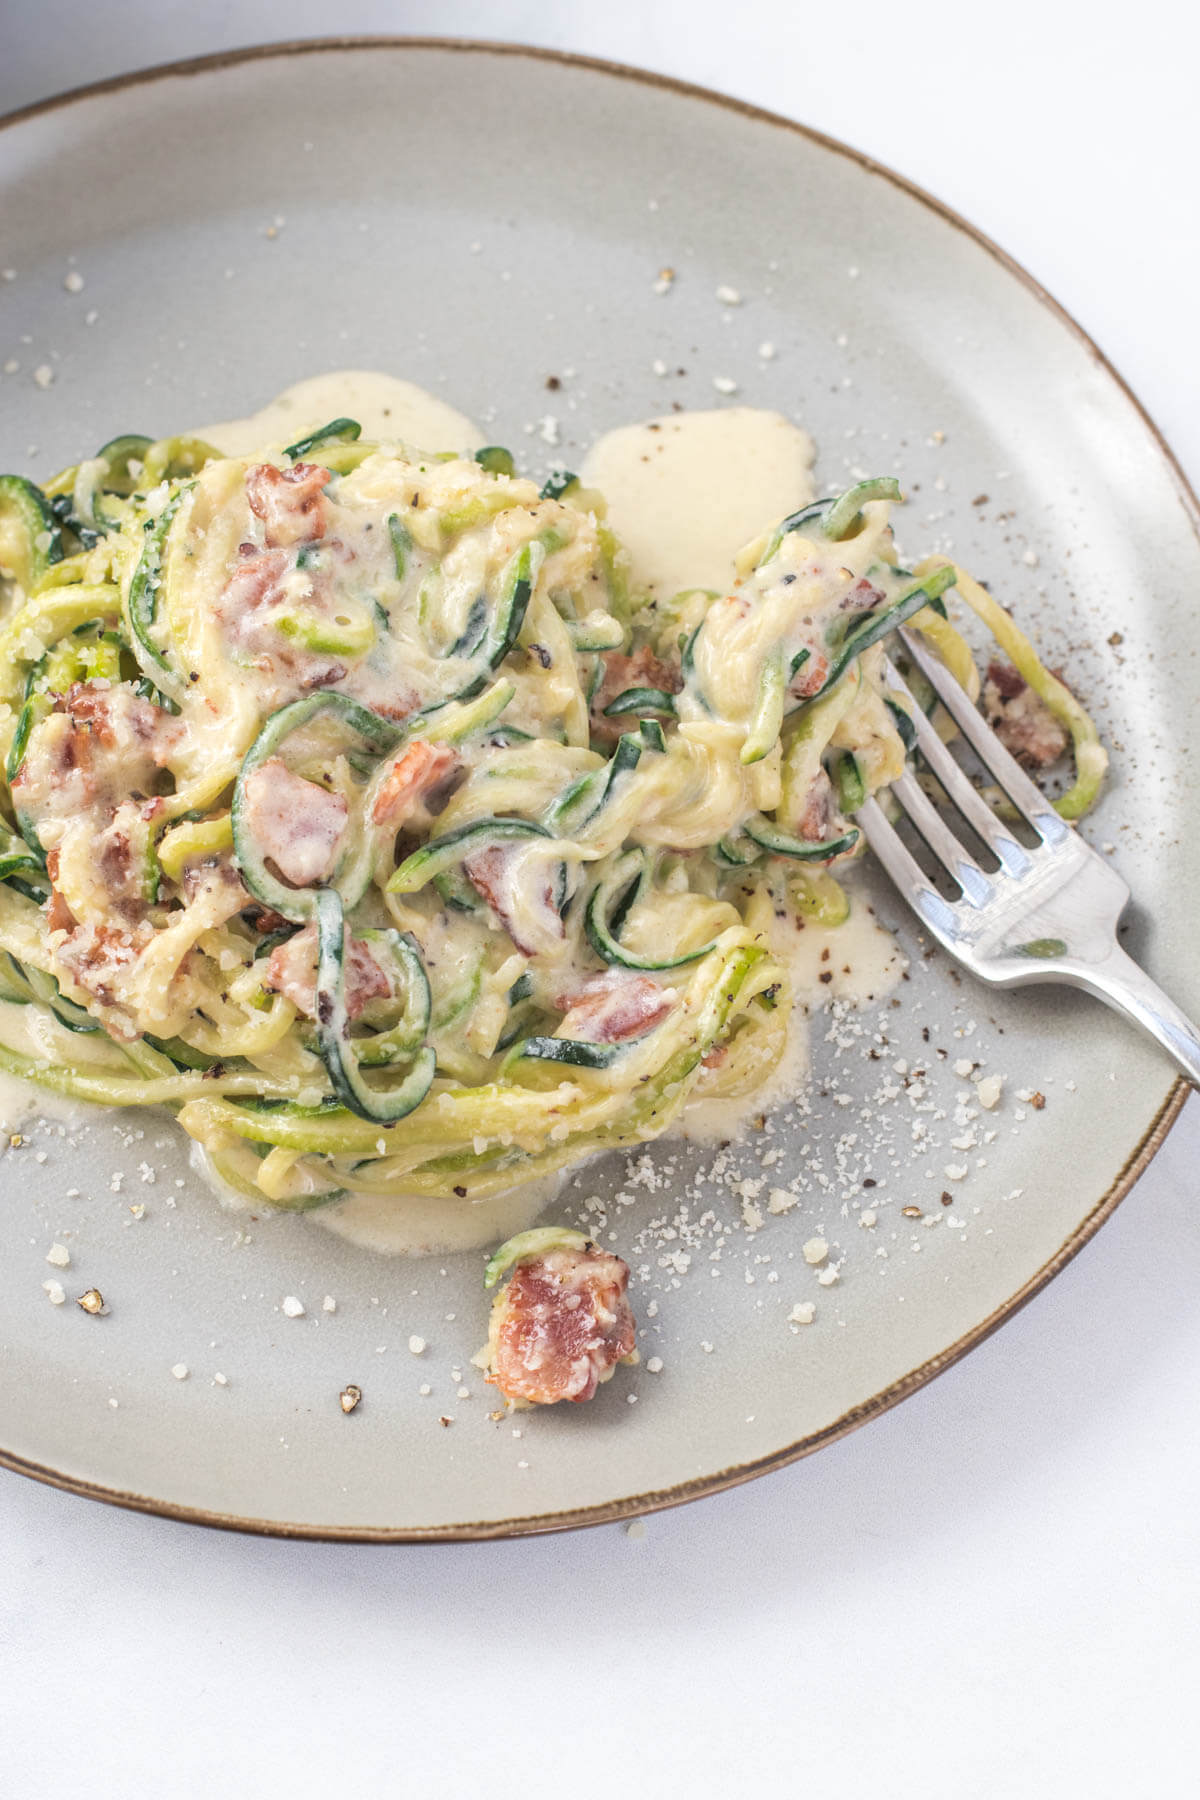 Zucchini noodles in carbonara sauce on a plate with a fork about to take a bite.